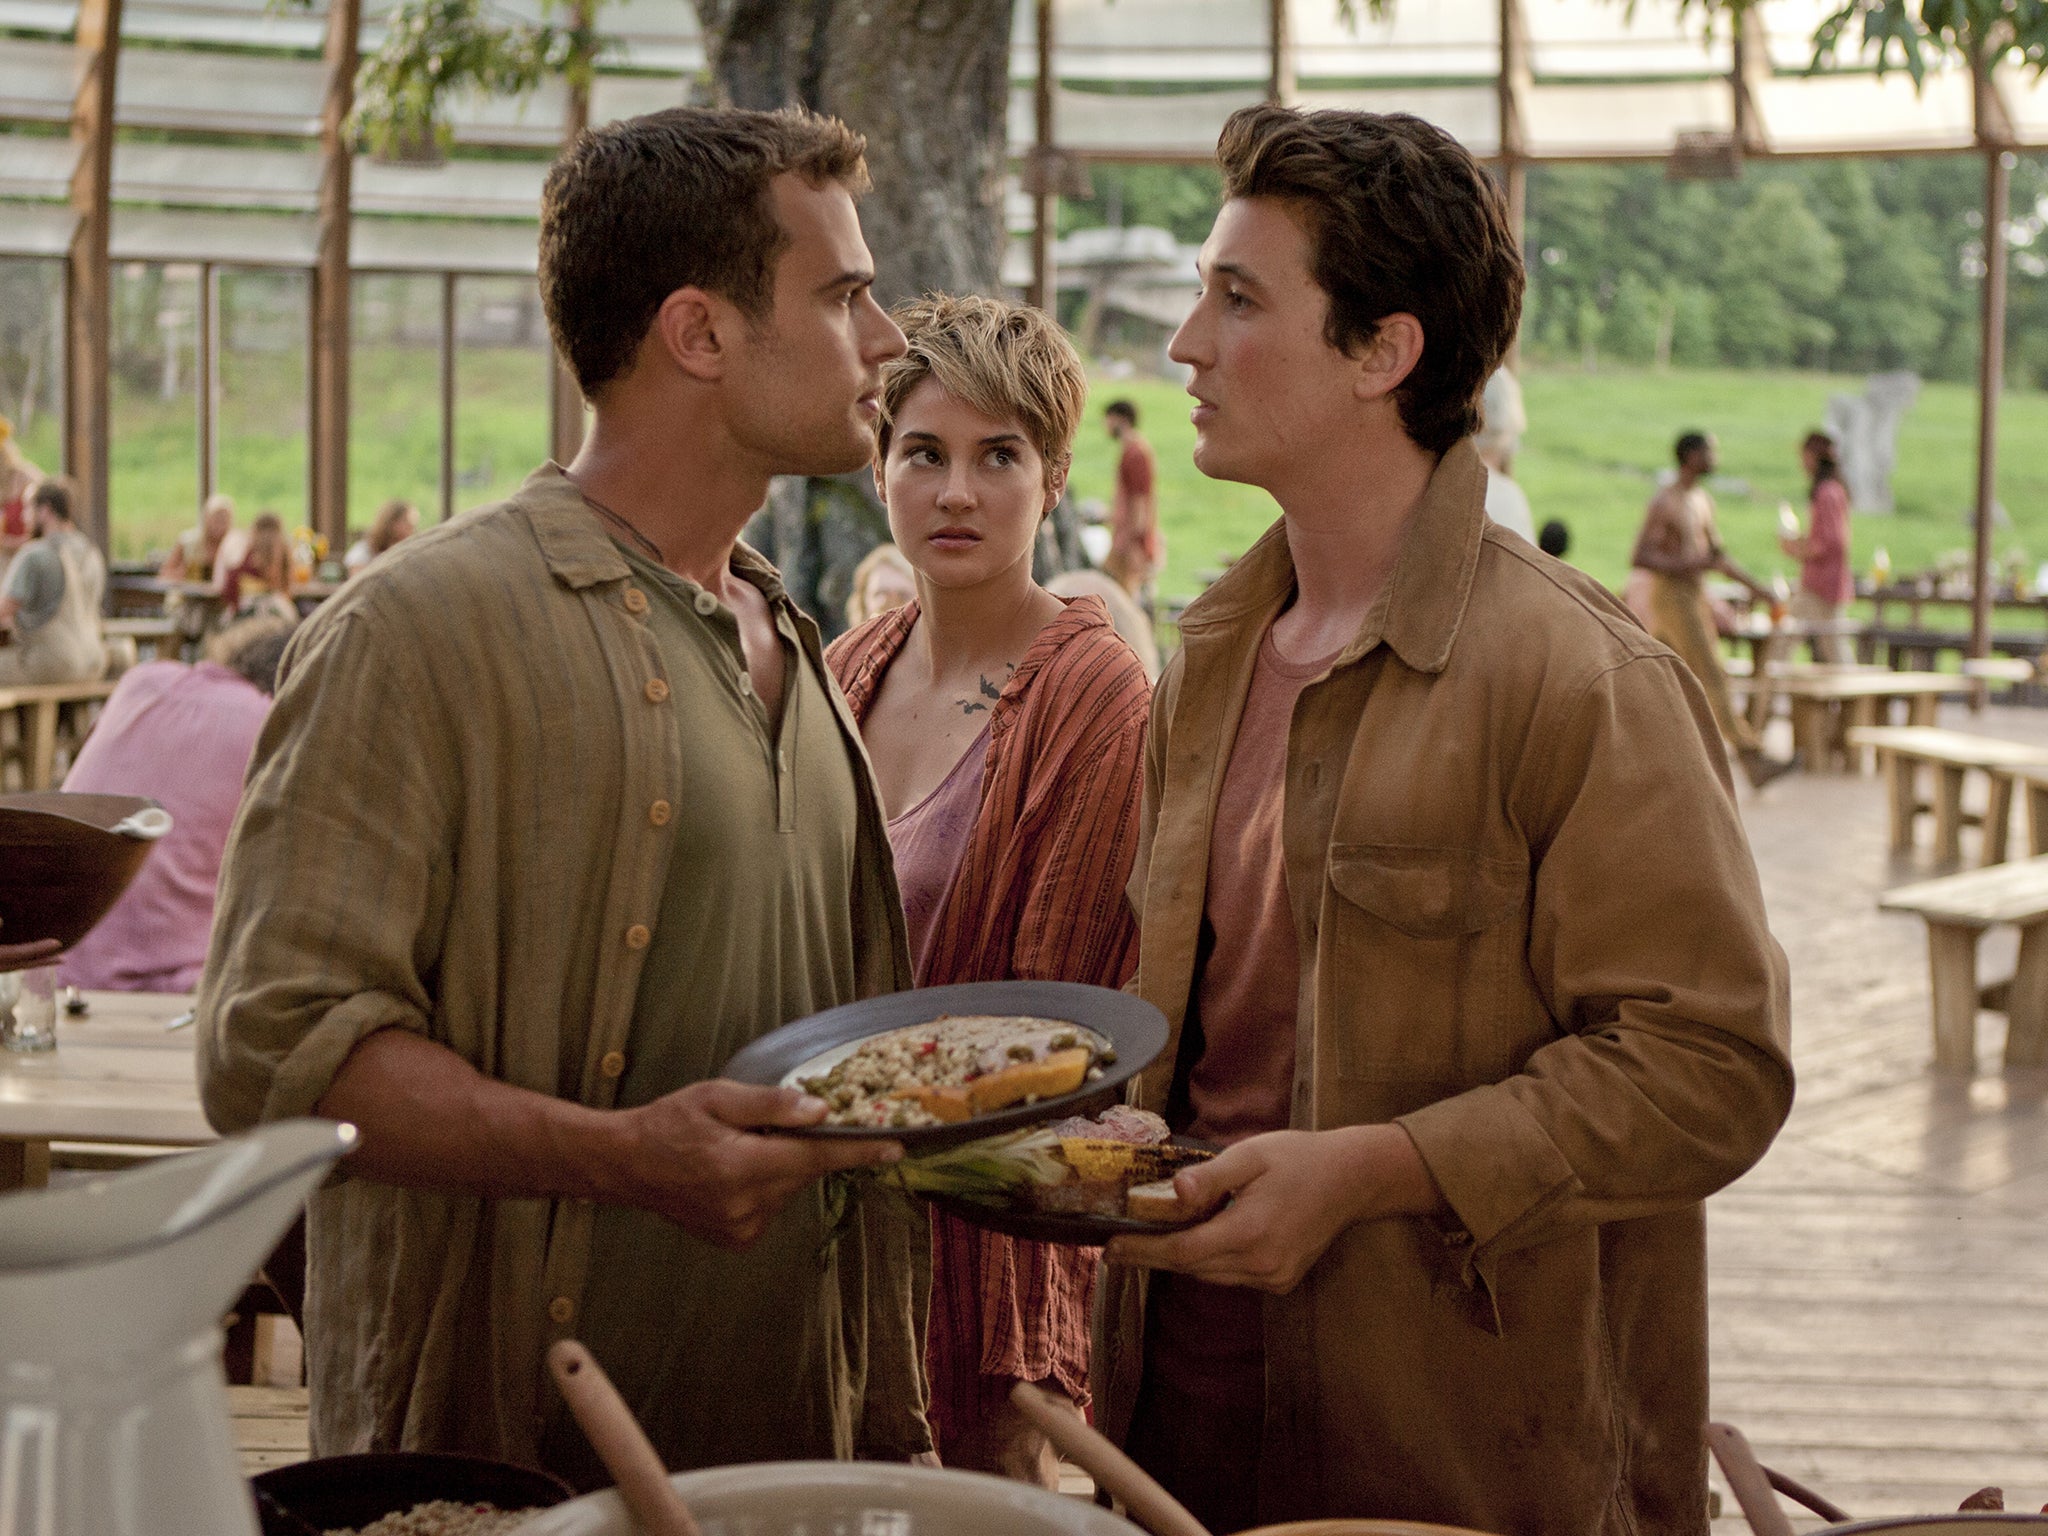 insurgent full movie online free no download no signup